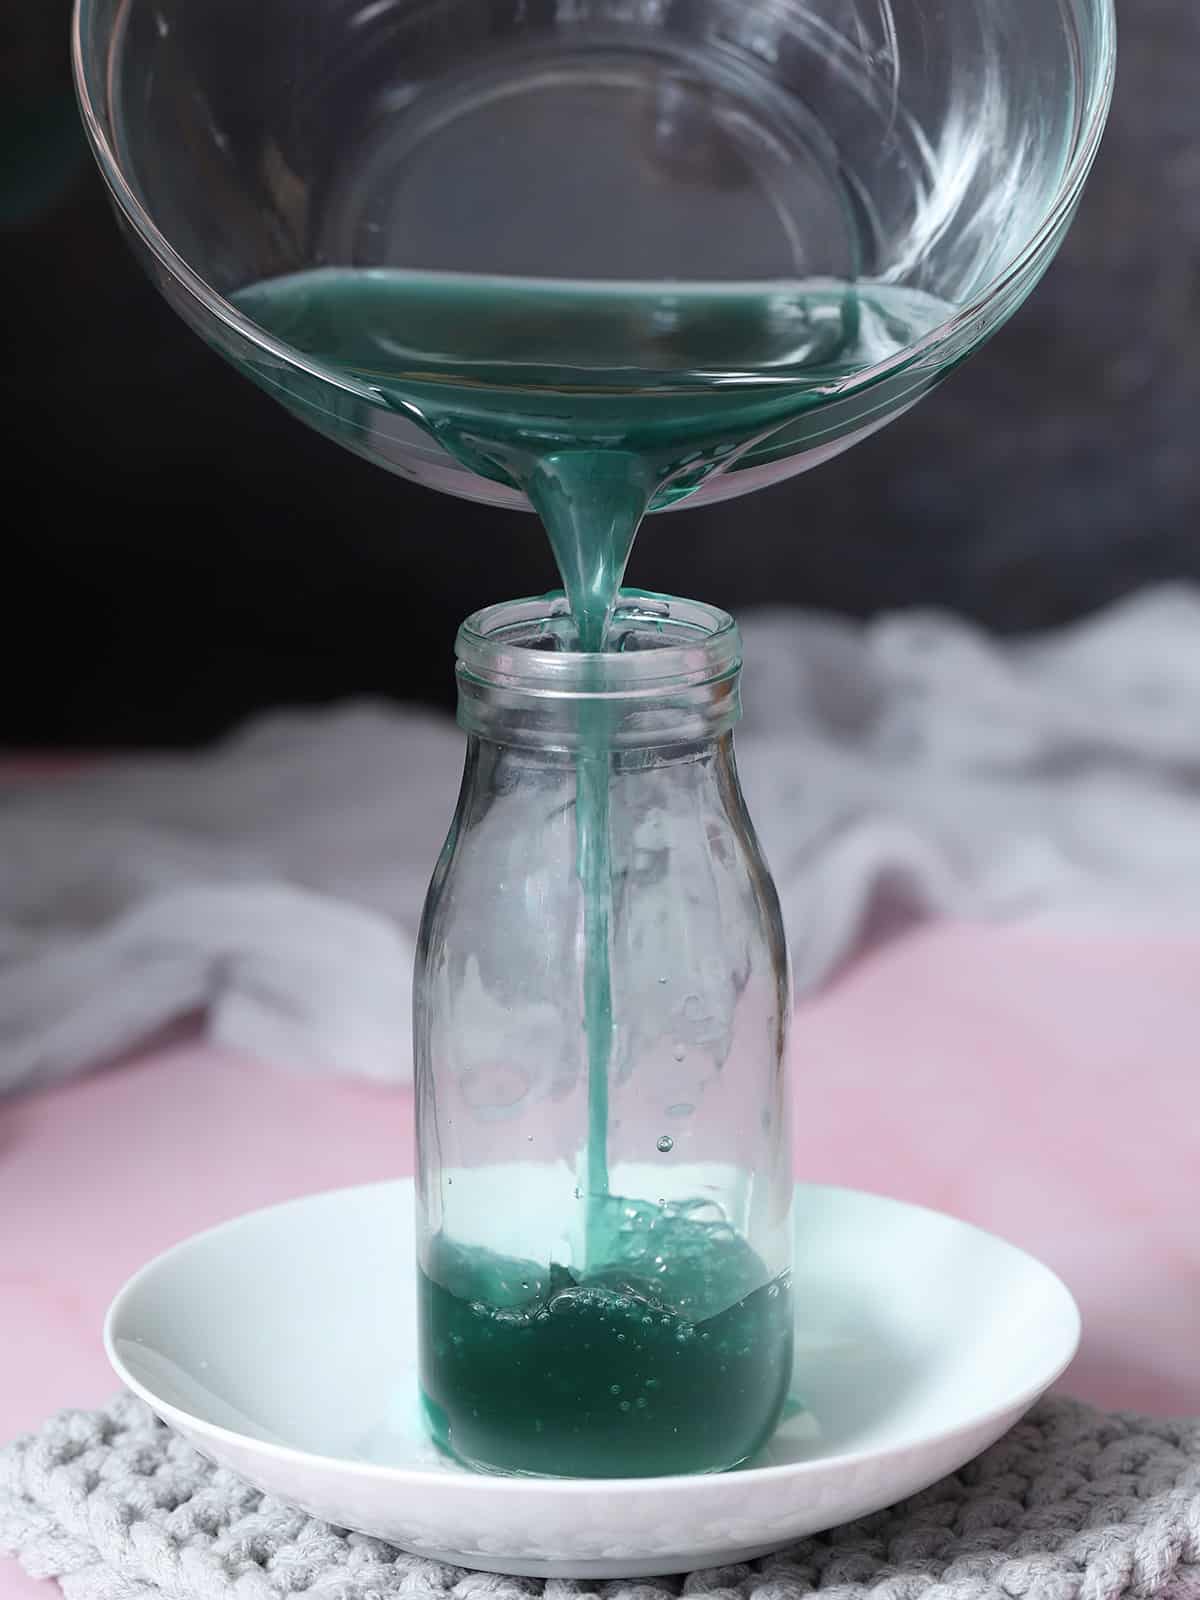 Blue Curaçao syrup being poured into a glass jar.